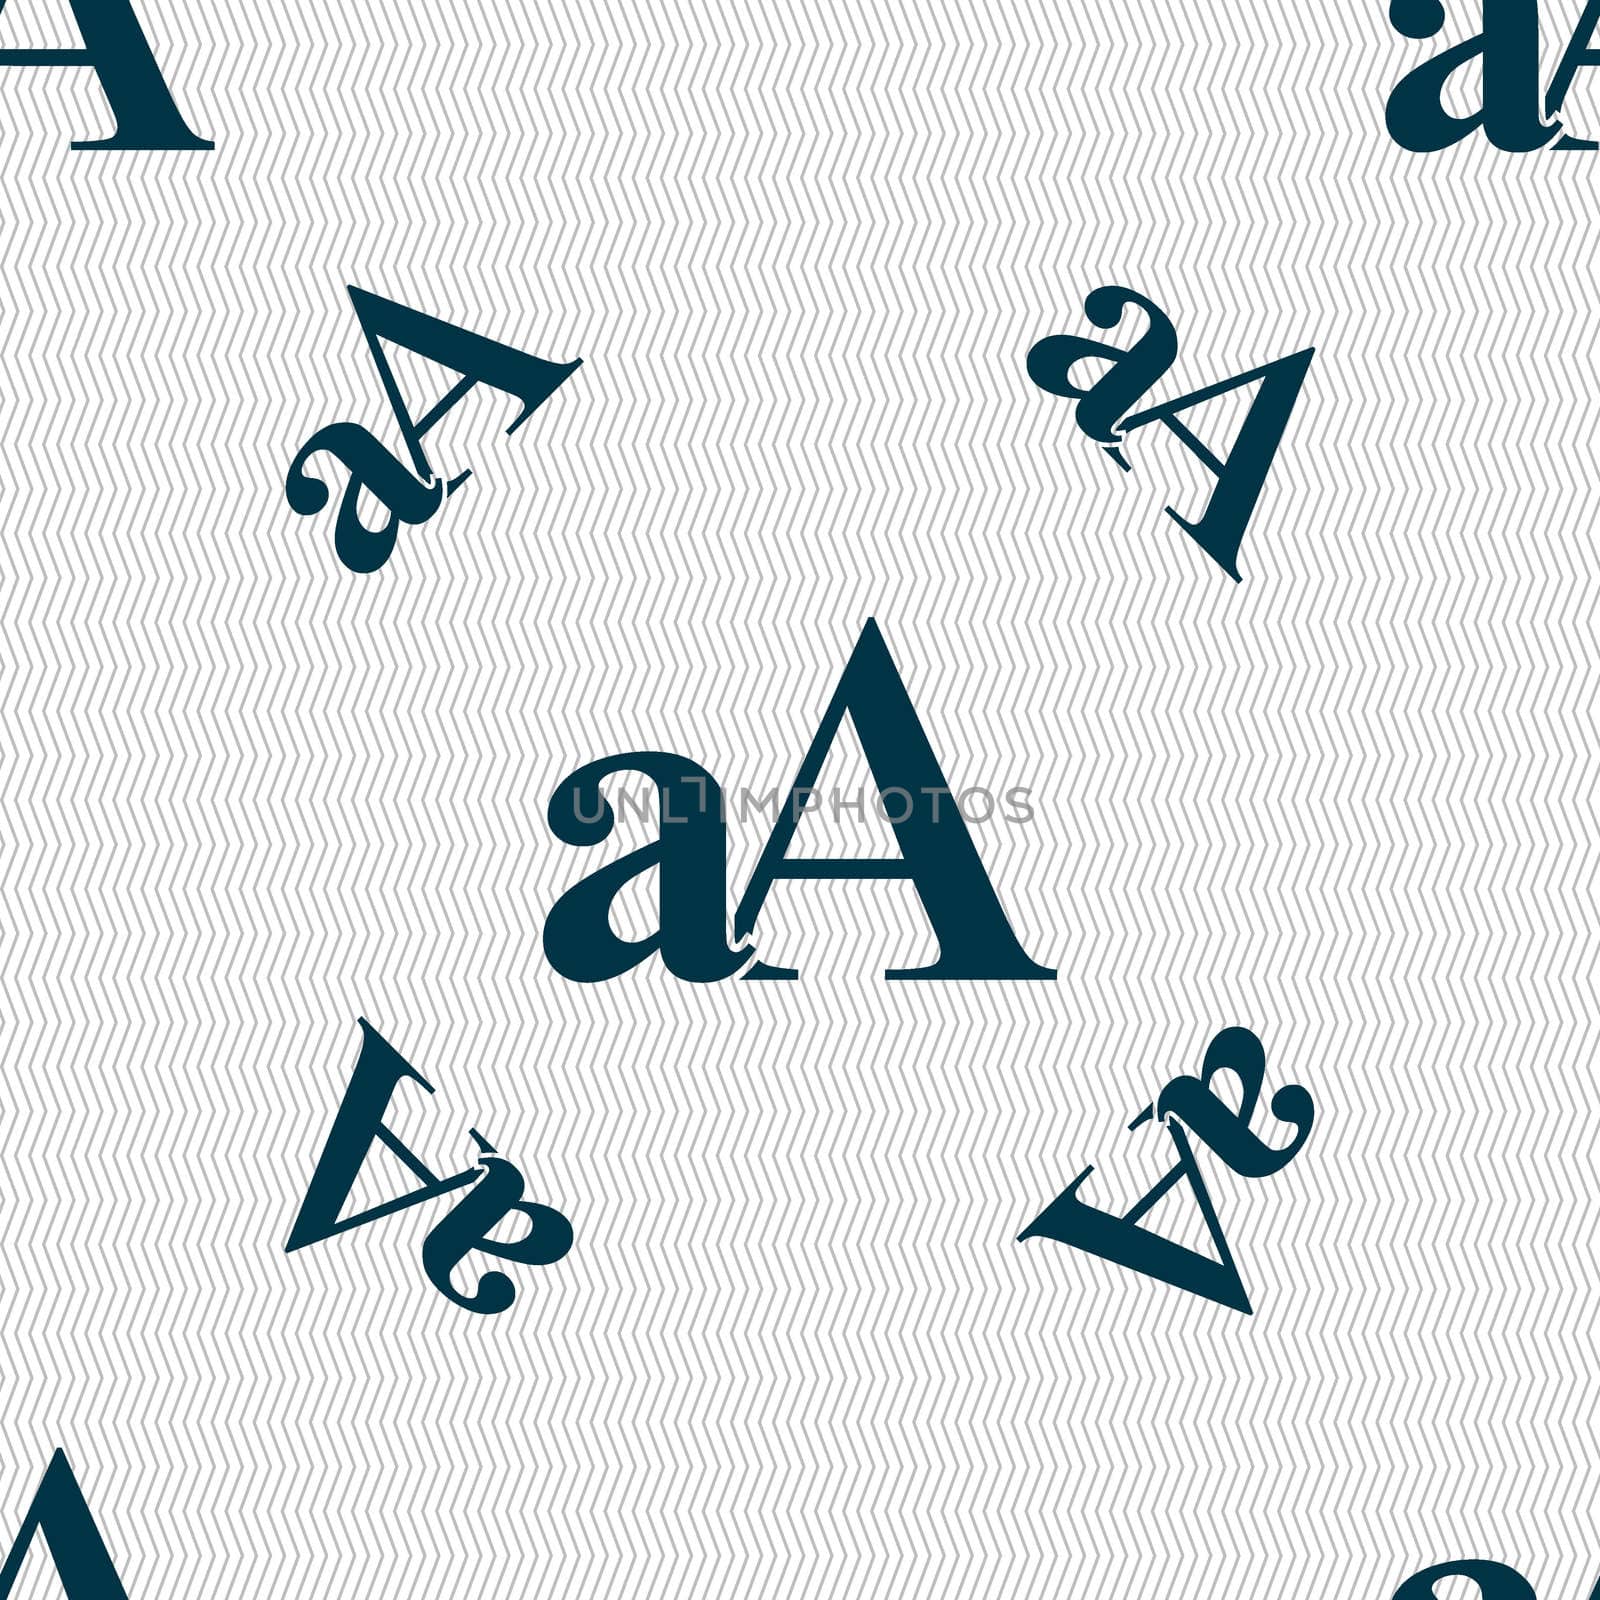 Enlarge font, aA icon sign. Seamless pattern with geometric texture.  by serhii_lohvyniuk